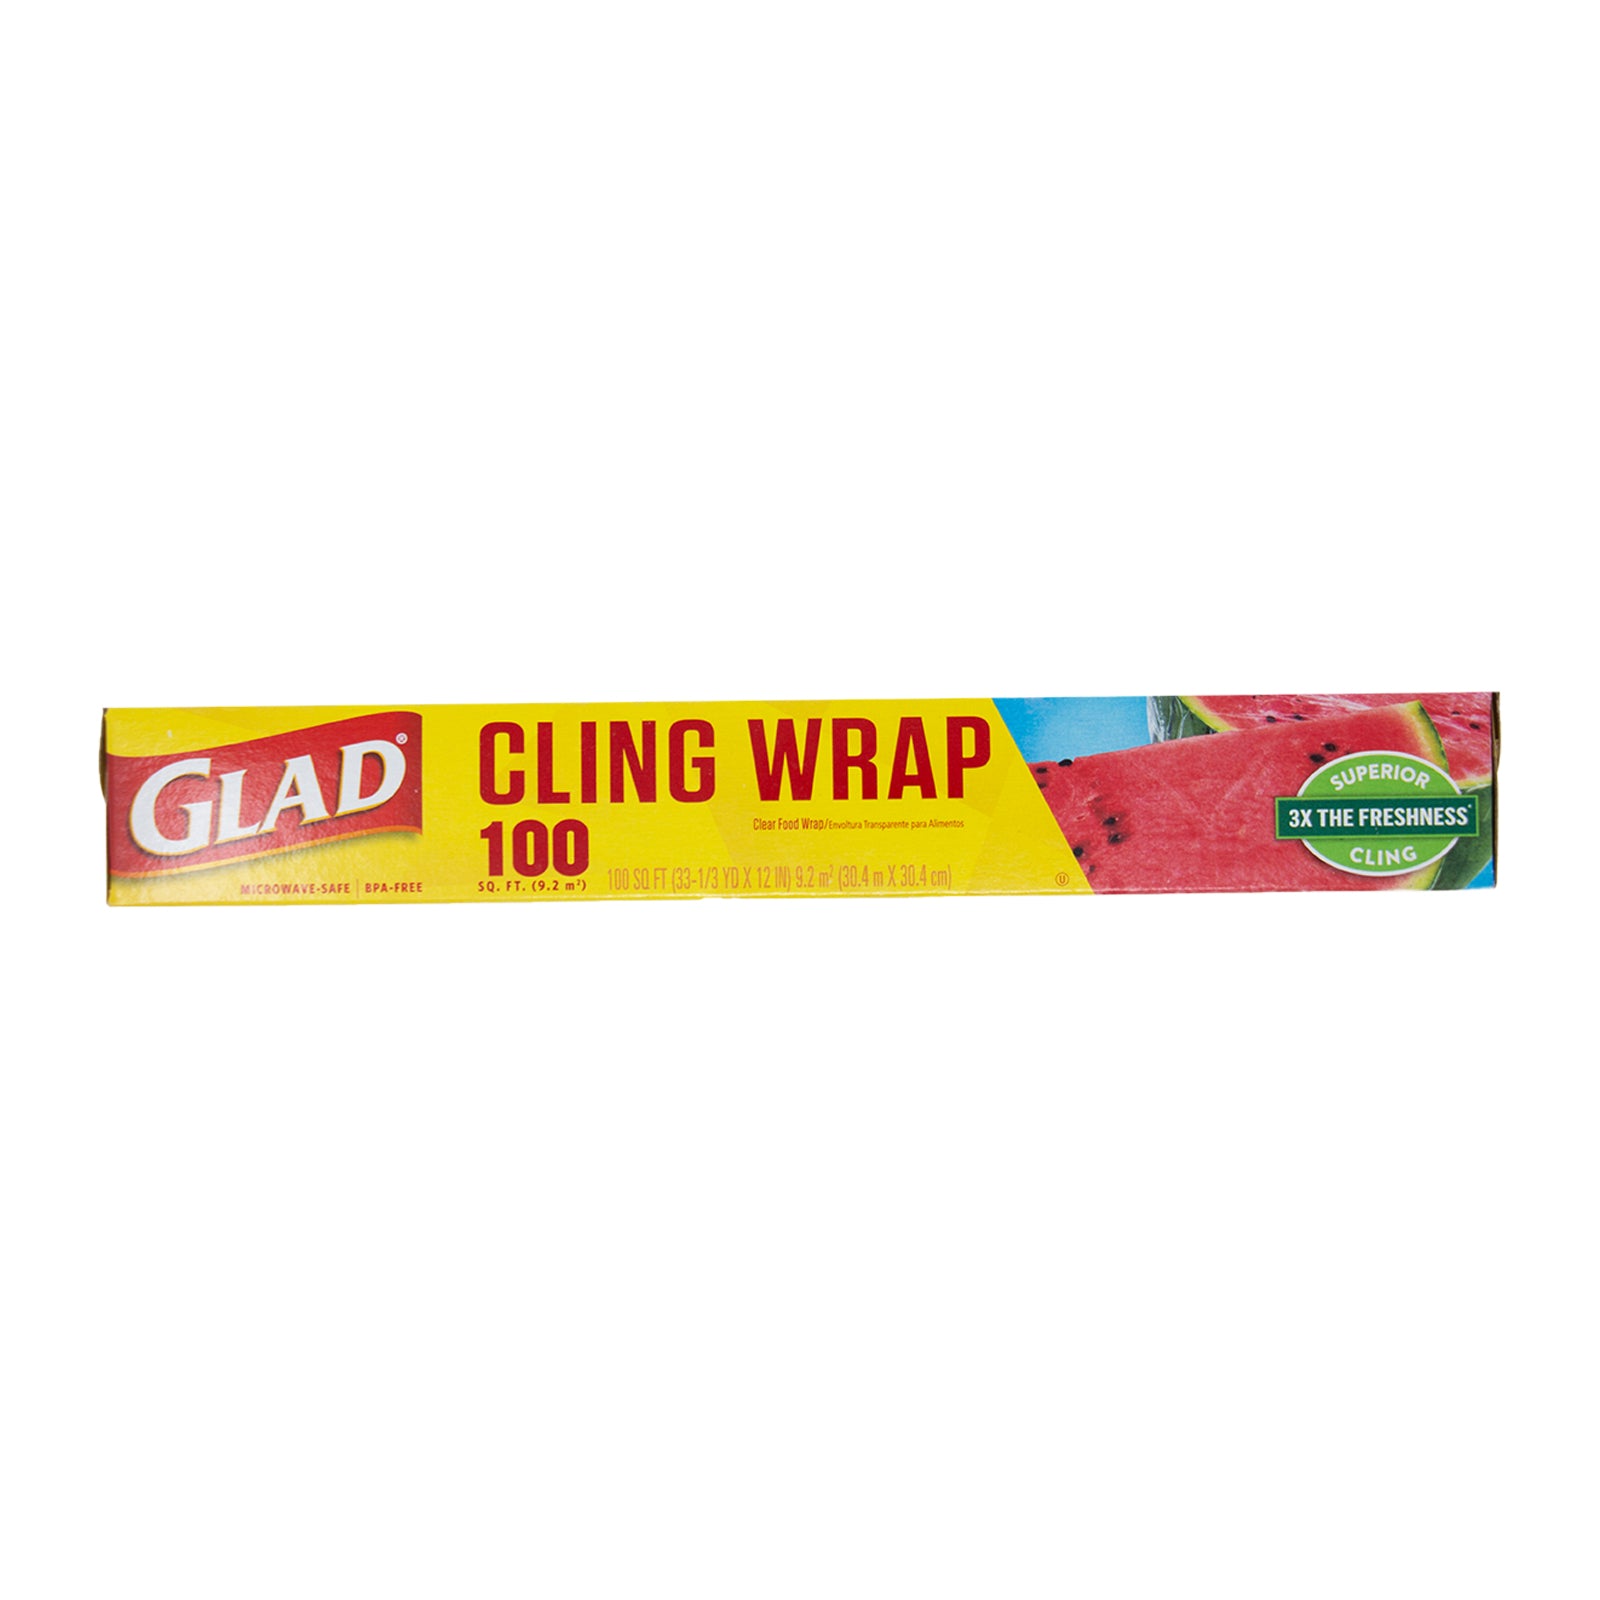 Glad Cling Wrap, Clear Food